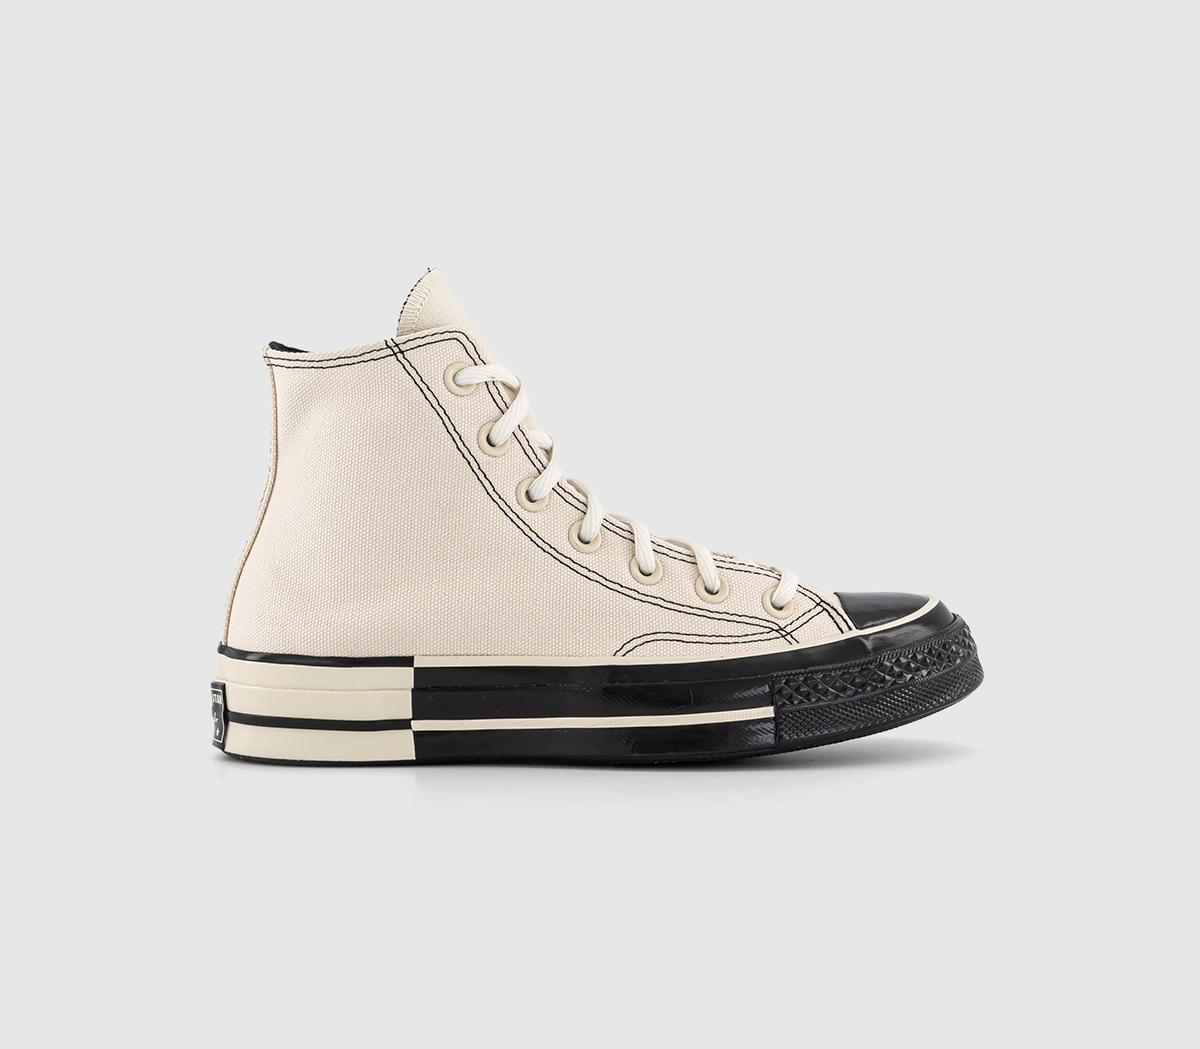 ConverseAll Star Hi 70 S TrainersNatural Ivory Black Shine